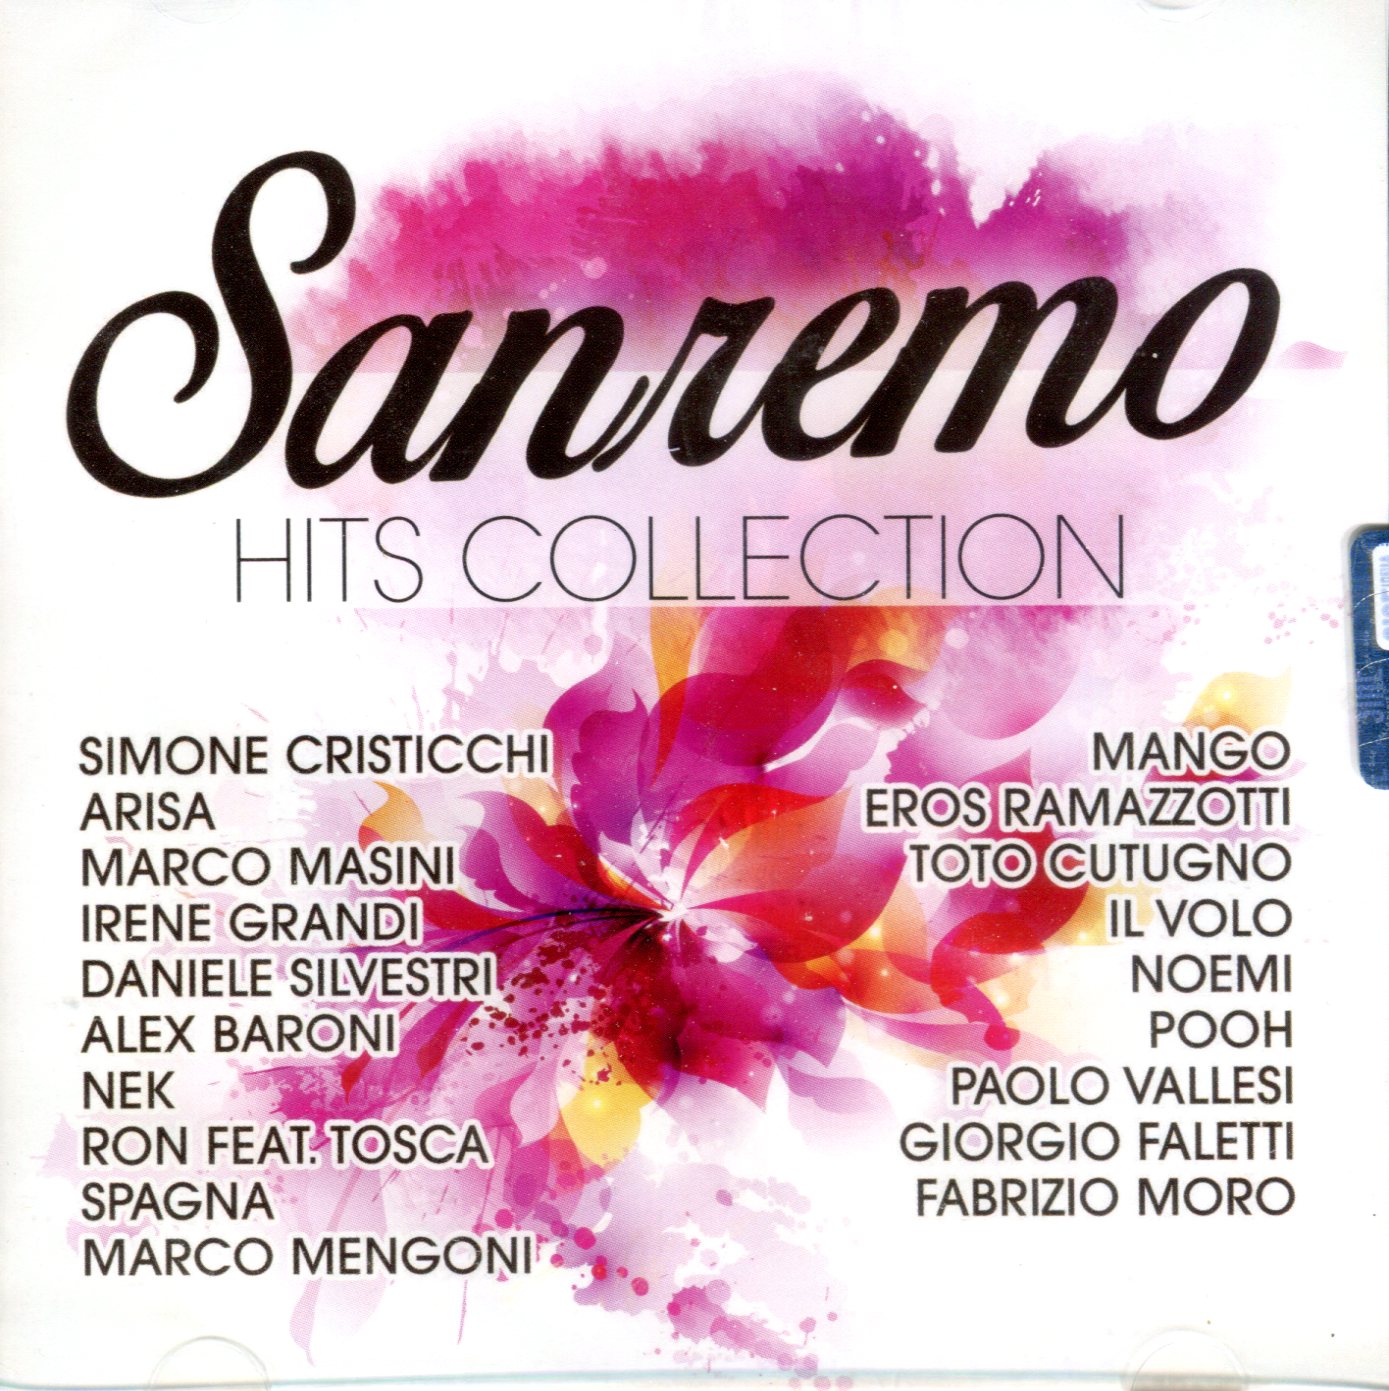 SANREMO HITS COLLECTION